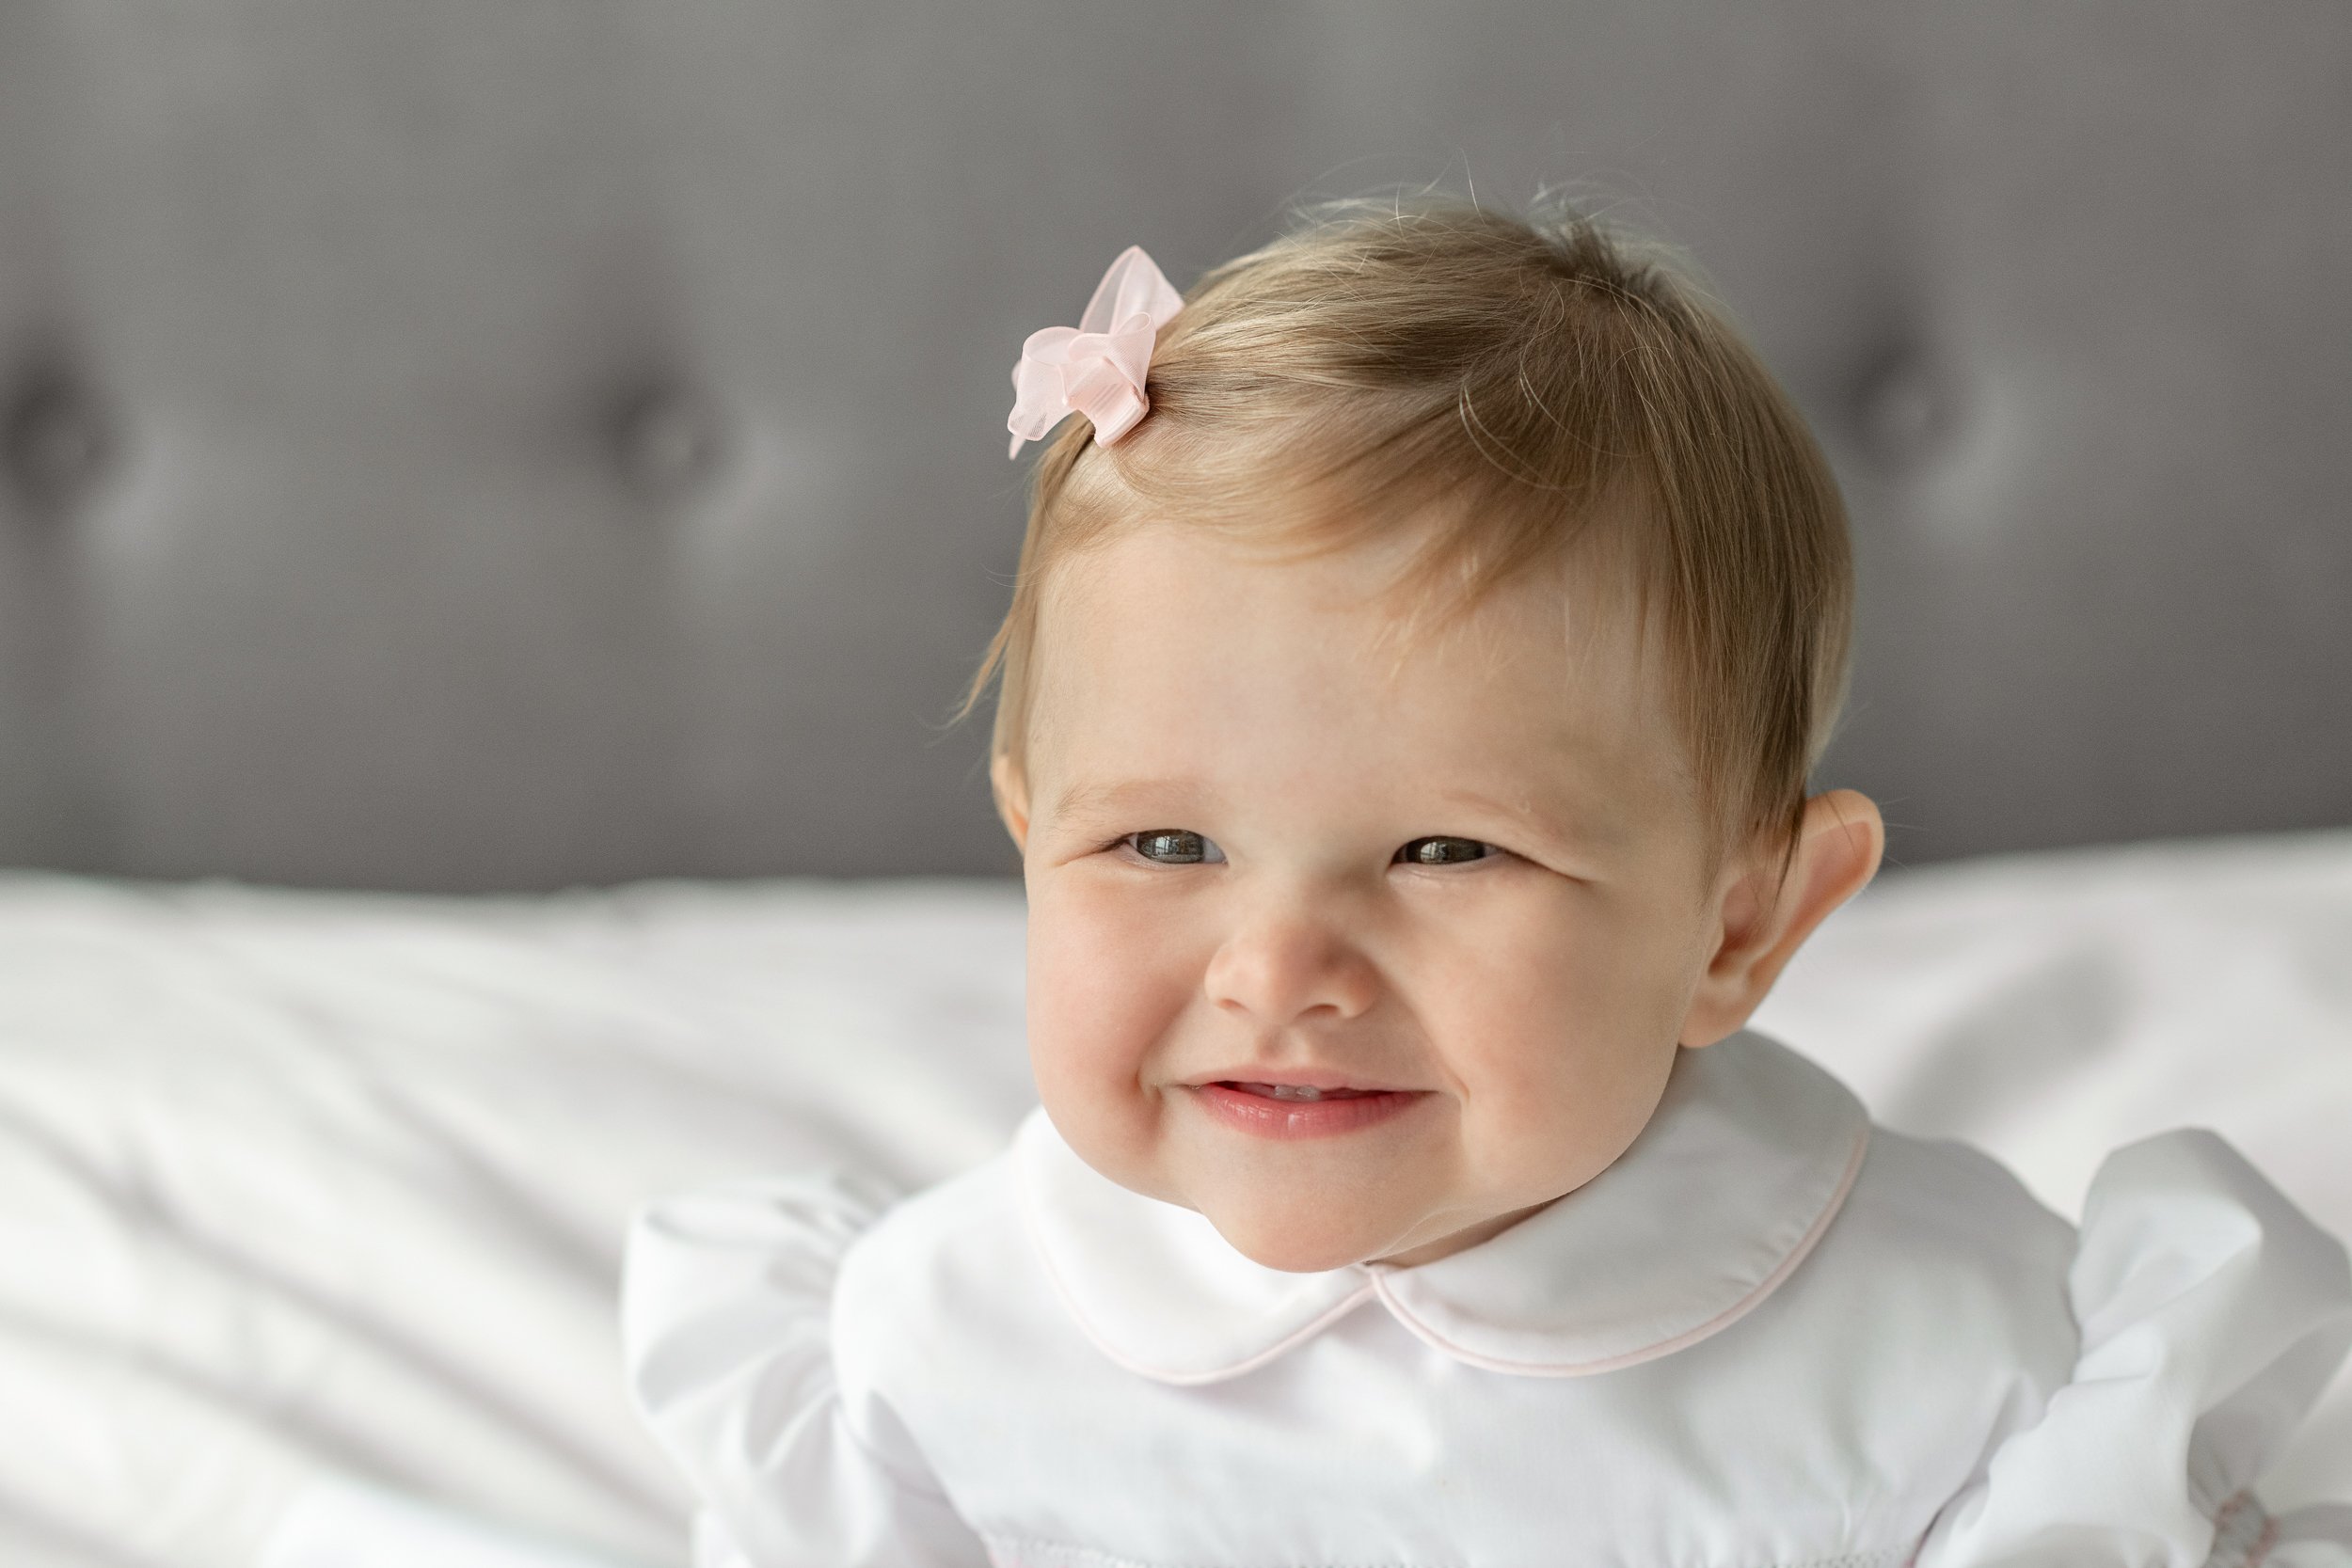  Nicole Hawkins Photography captures a portrait of a little girl smiling with a peter pan collar. NJ photographers little girl with bow white dress #nicolehawkinsphotography #newjerseyphotographers #familyphotographer #6monthportraits #NJfamilyphotos